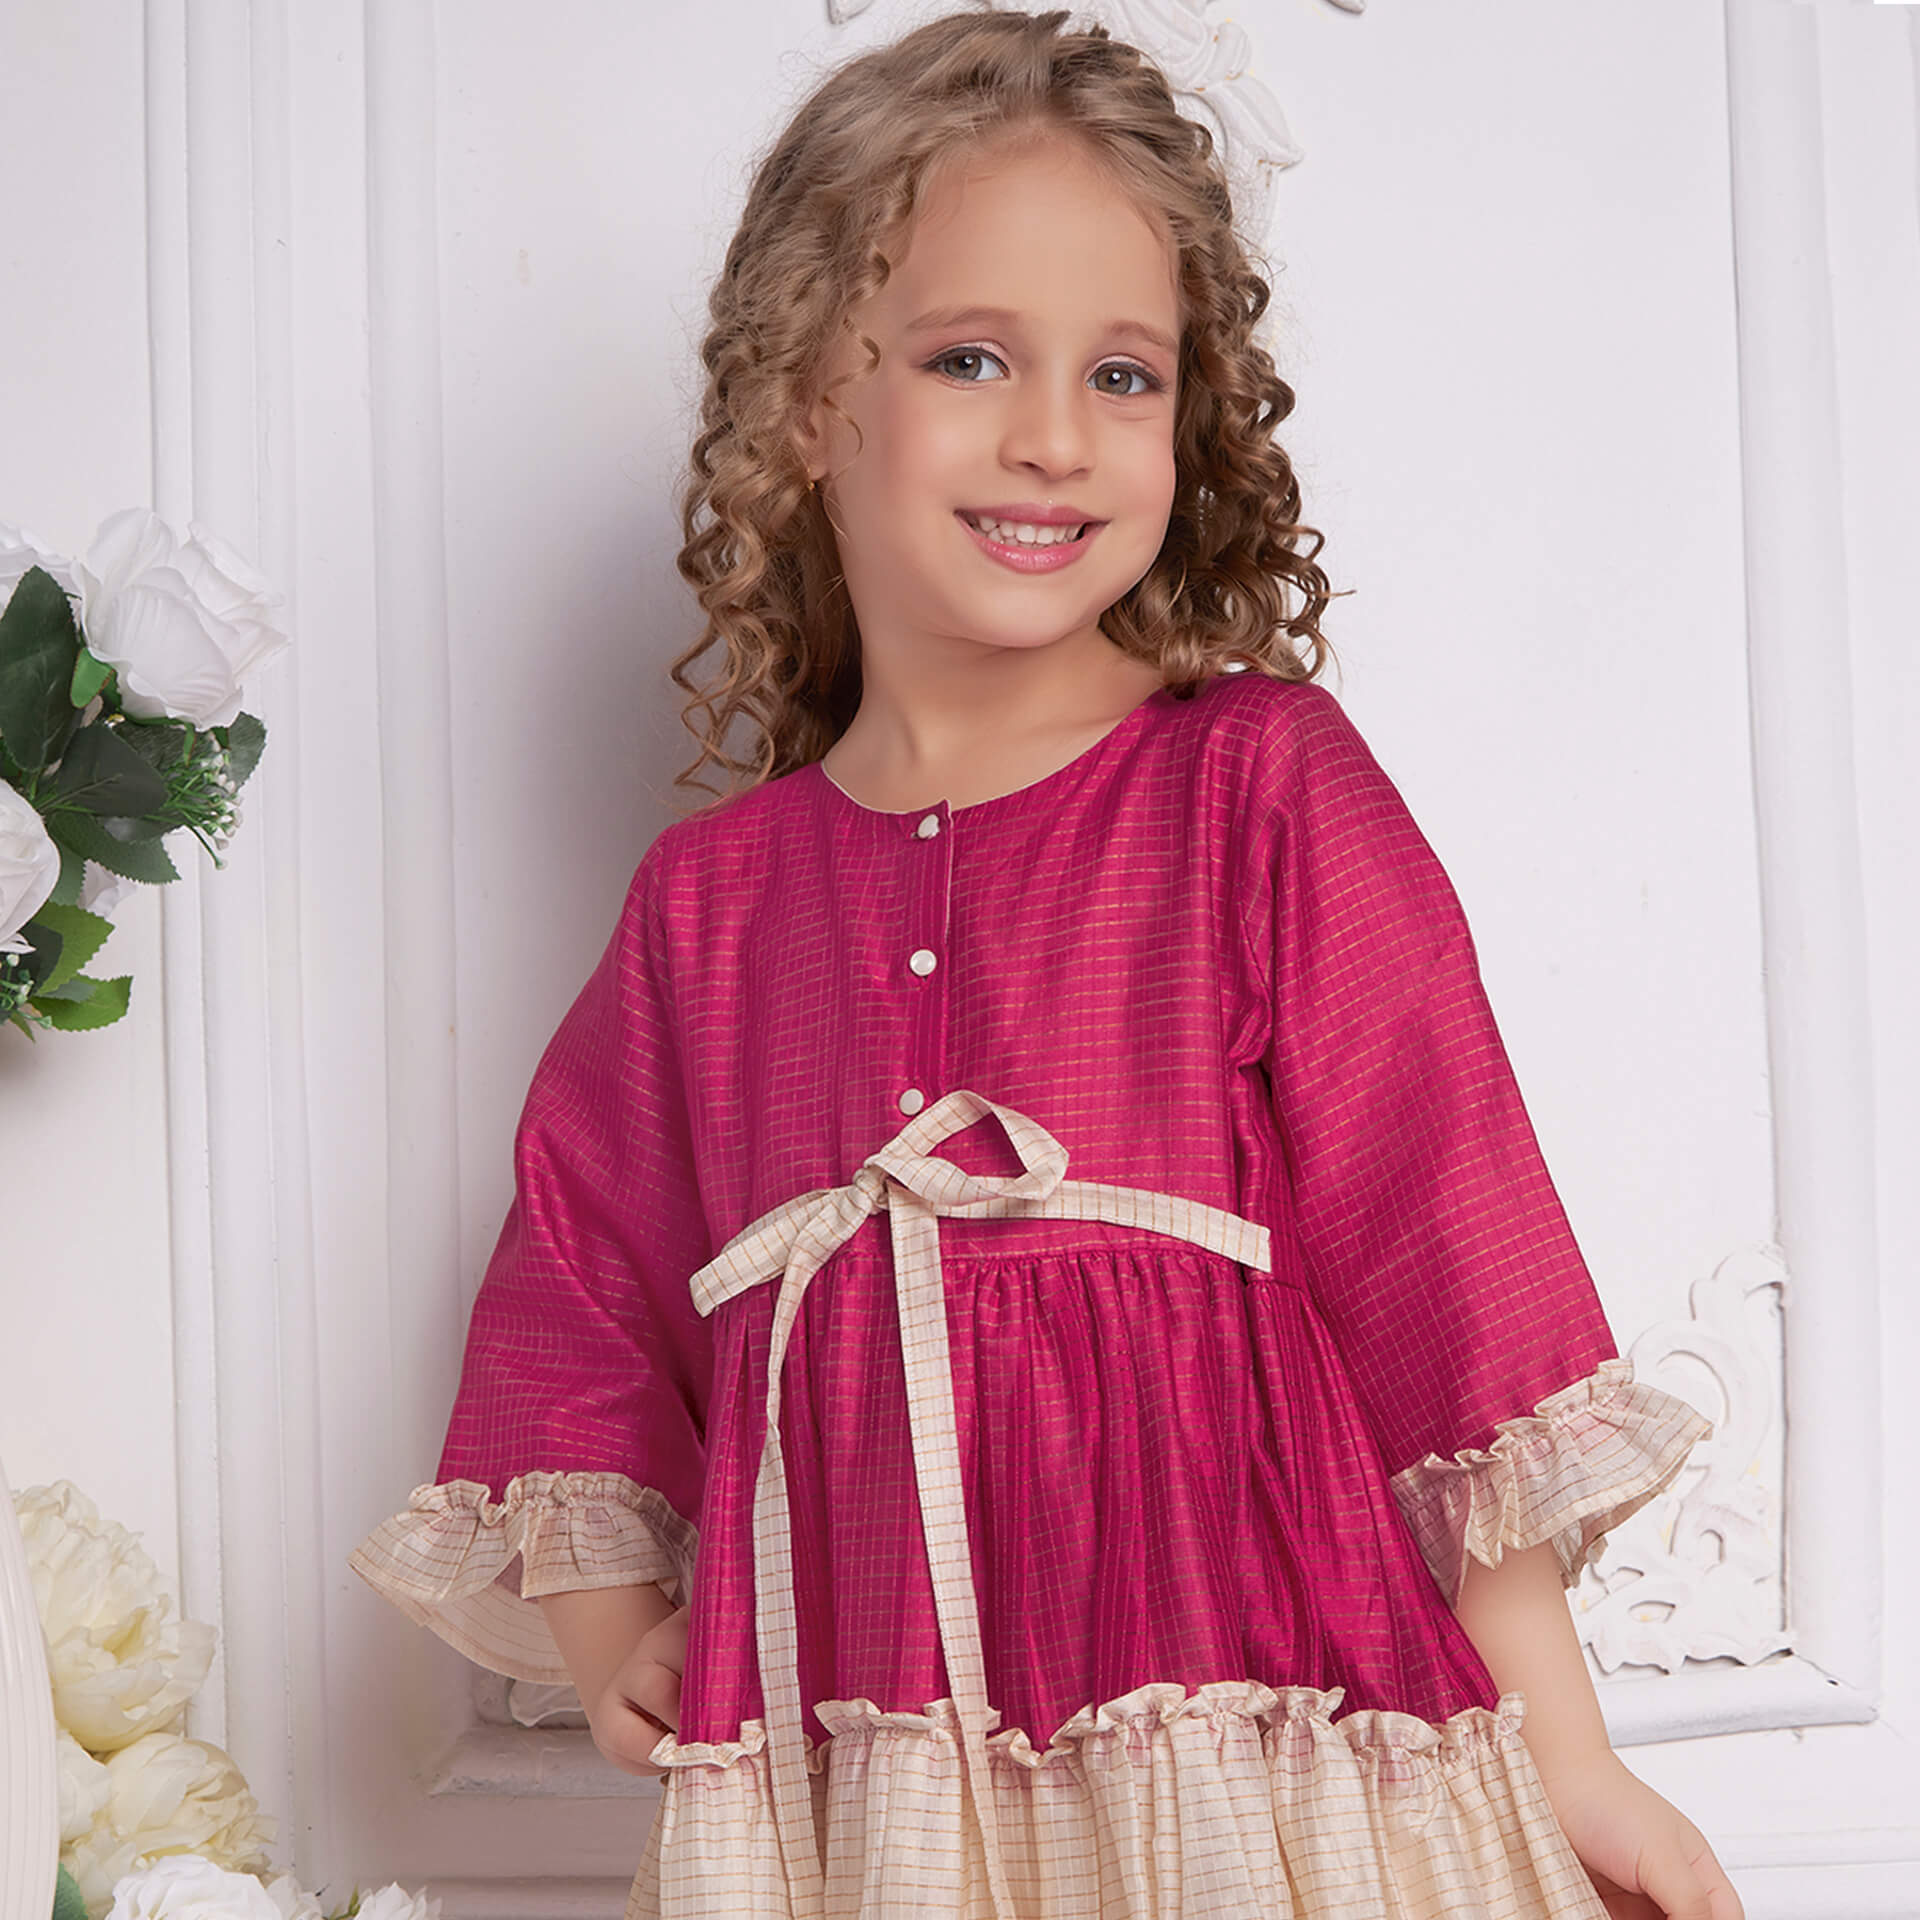 With a slight turn, a girl posing in pink and ivory chanderi dress with front tie up sash